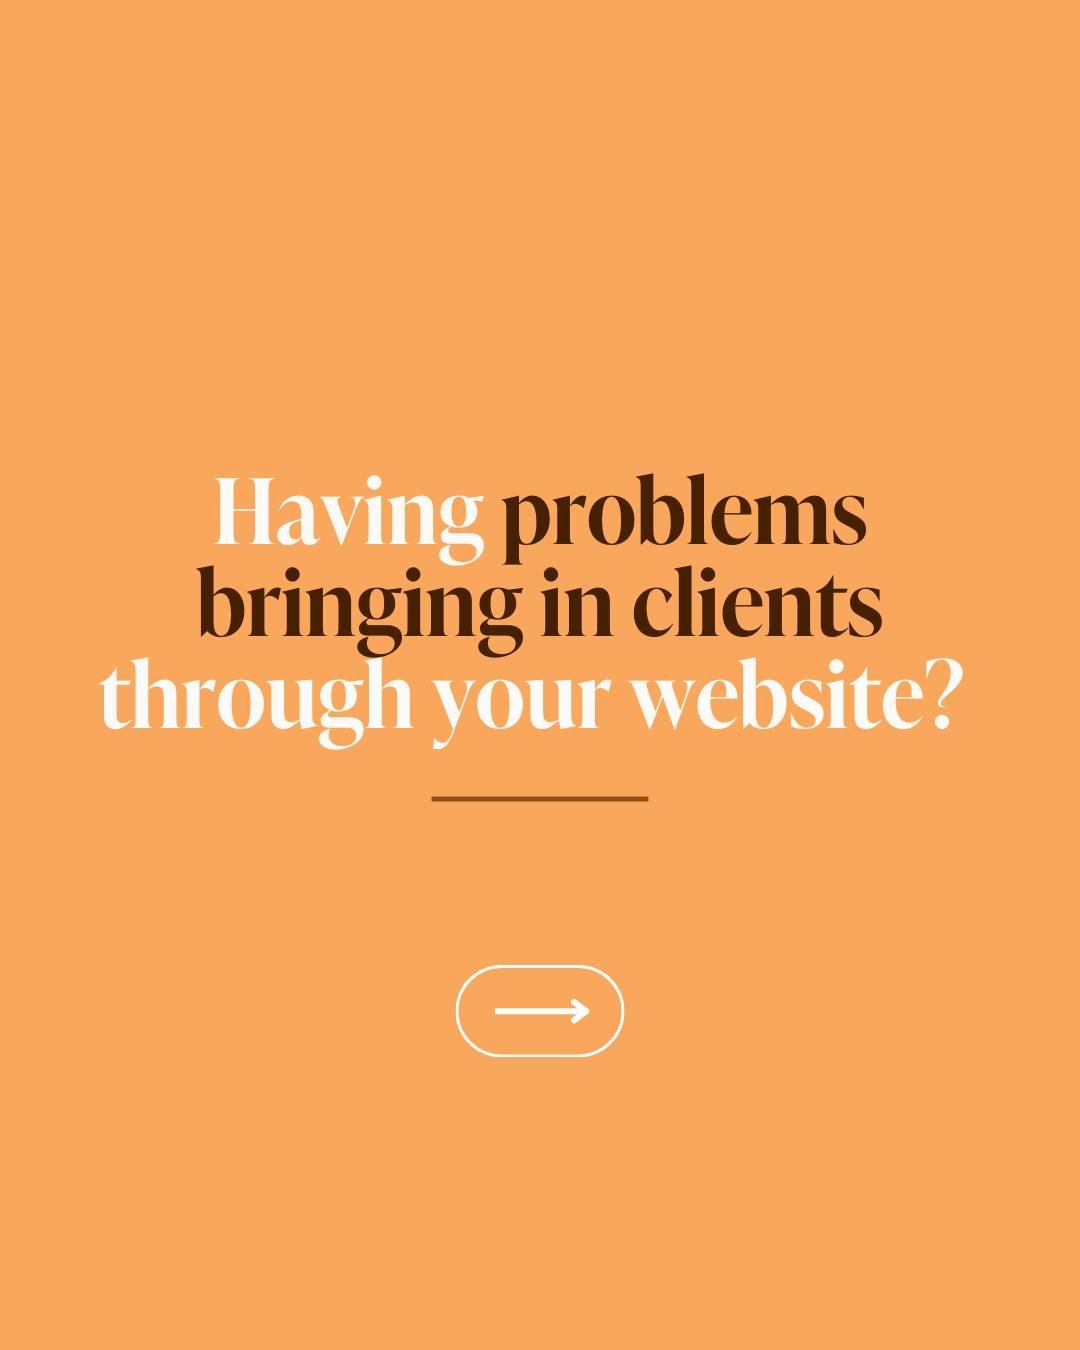 Ignoring these pain points = lost leads and missed opportunities! 😬

As a business owner, you can't afford a website that isn't working for you. 

Here's the thing - fixing those website pain points can completely transform your online presence.

Ar